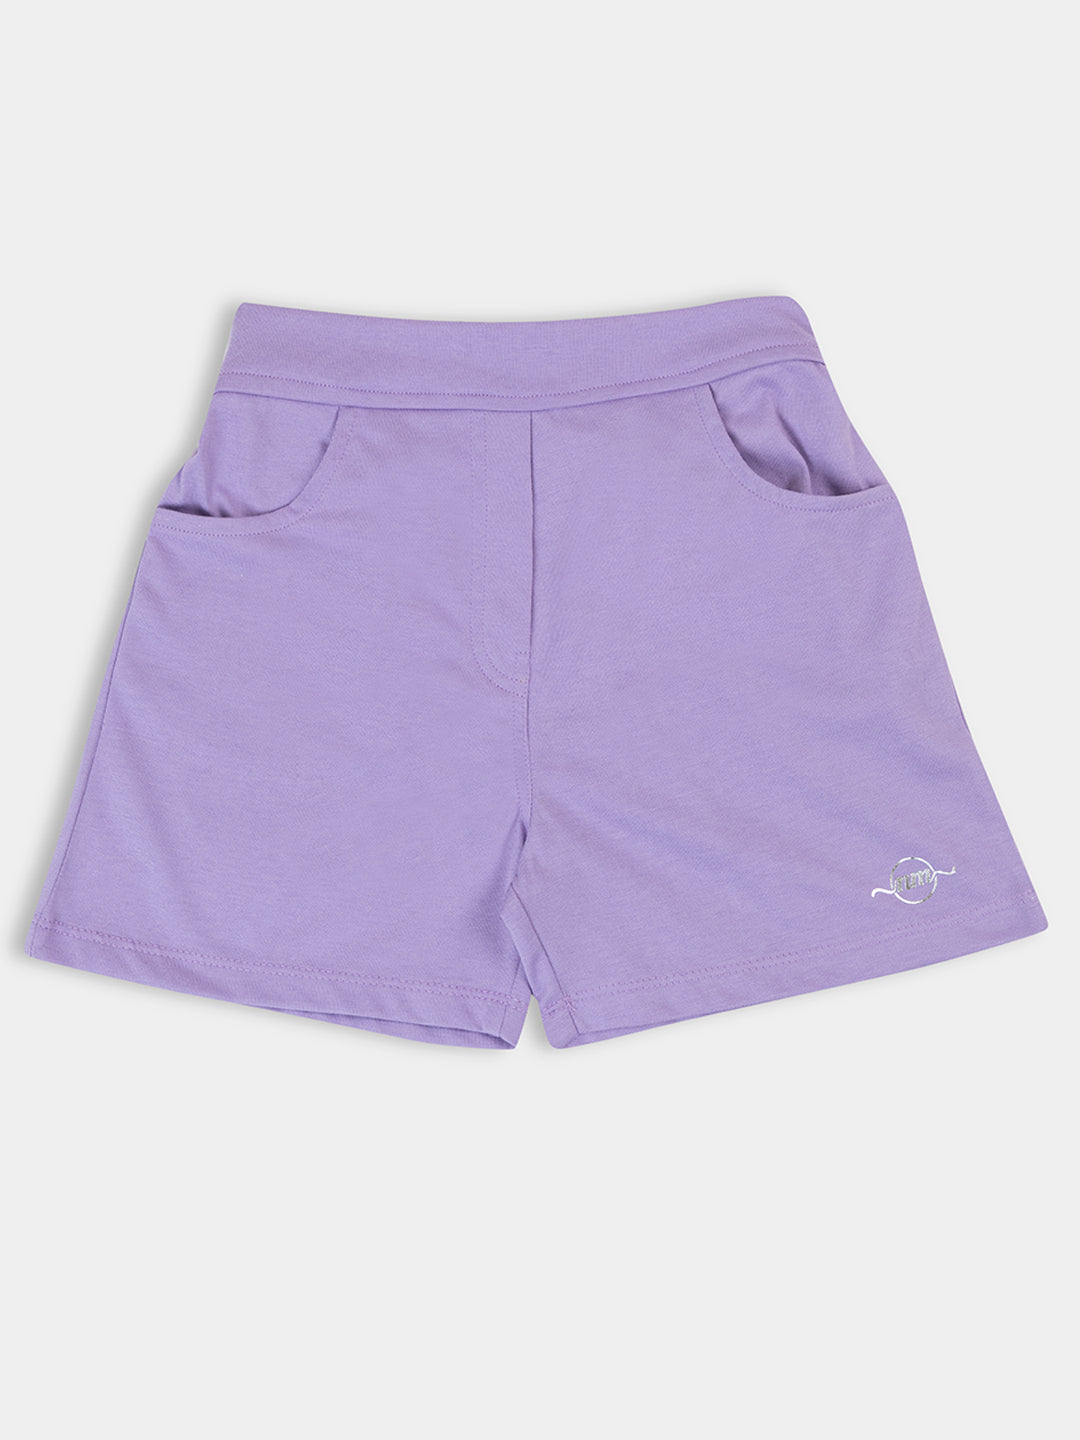 Sweet Summer Set: 5-Piece Combo of Girls' Solid Shorts